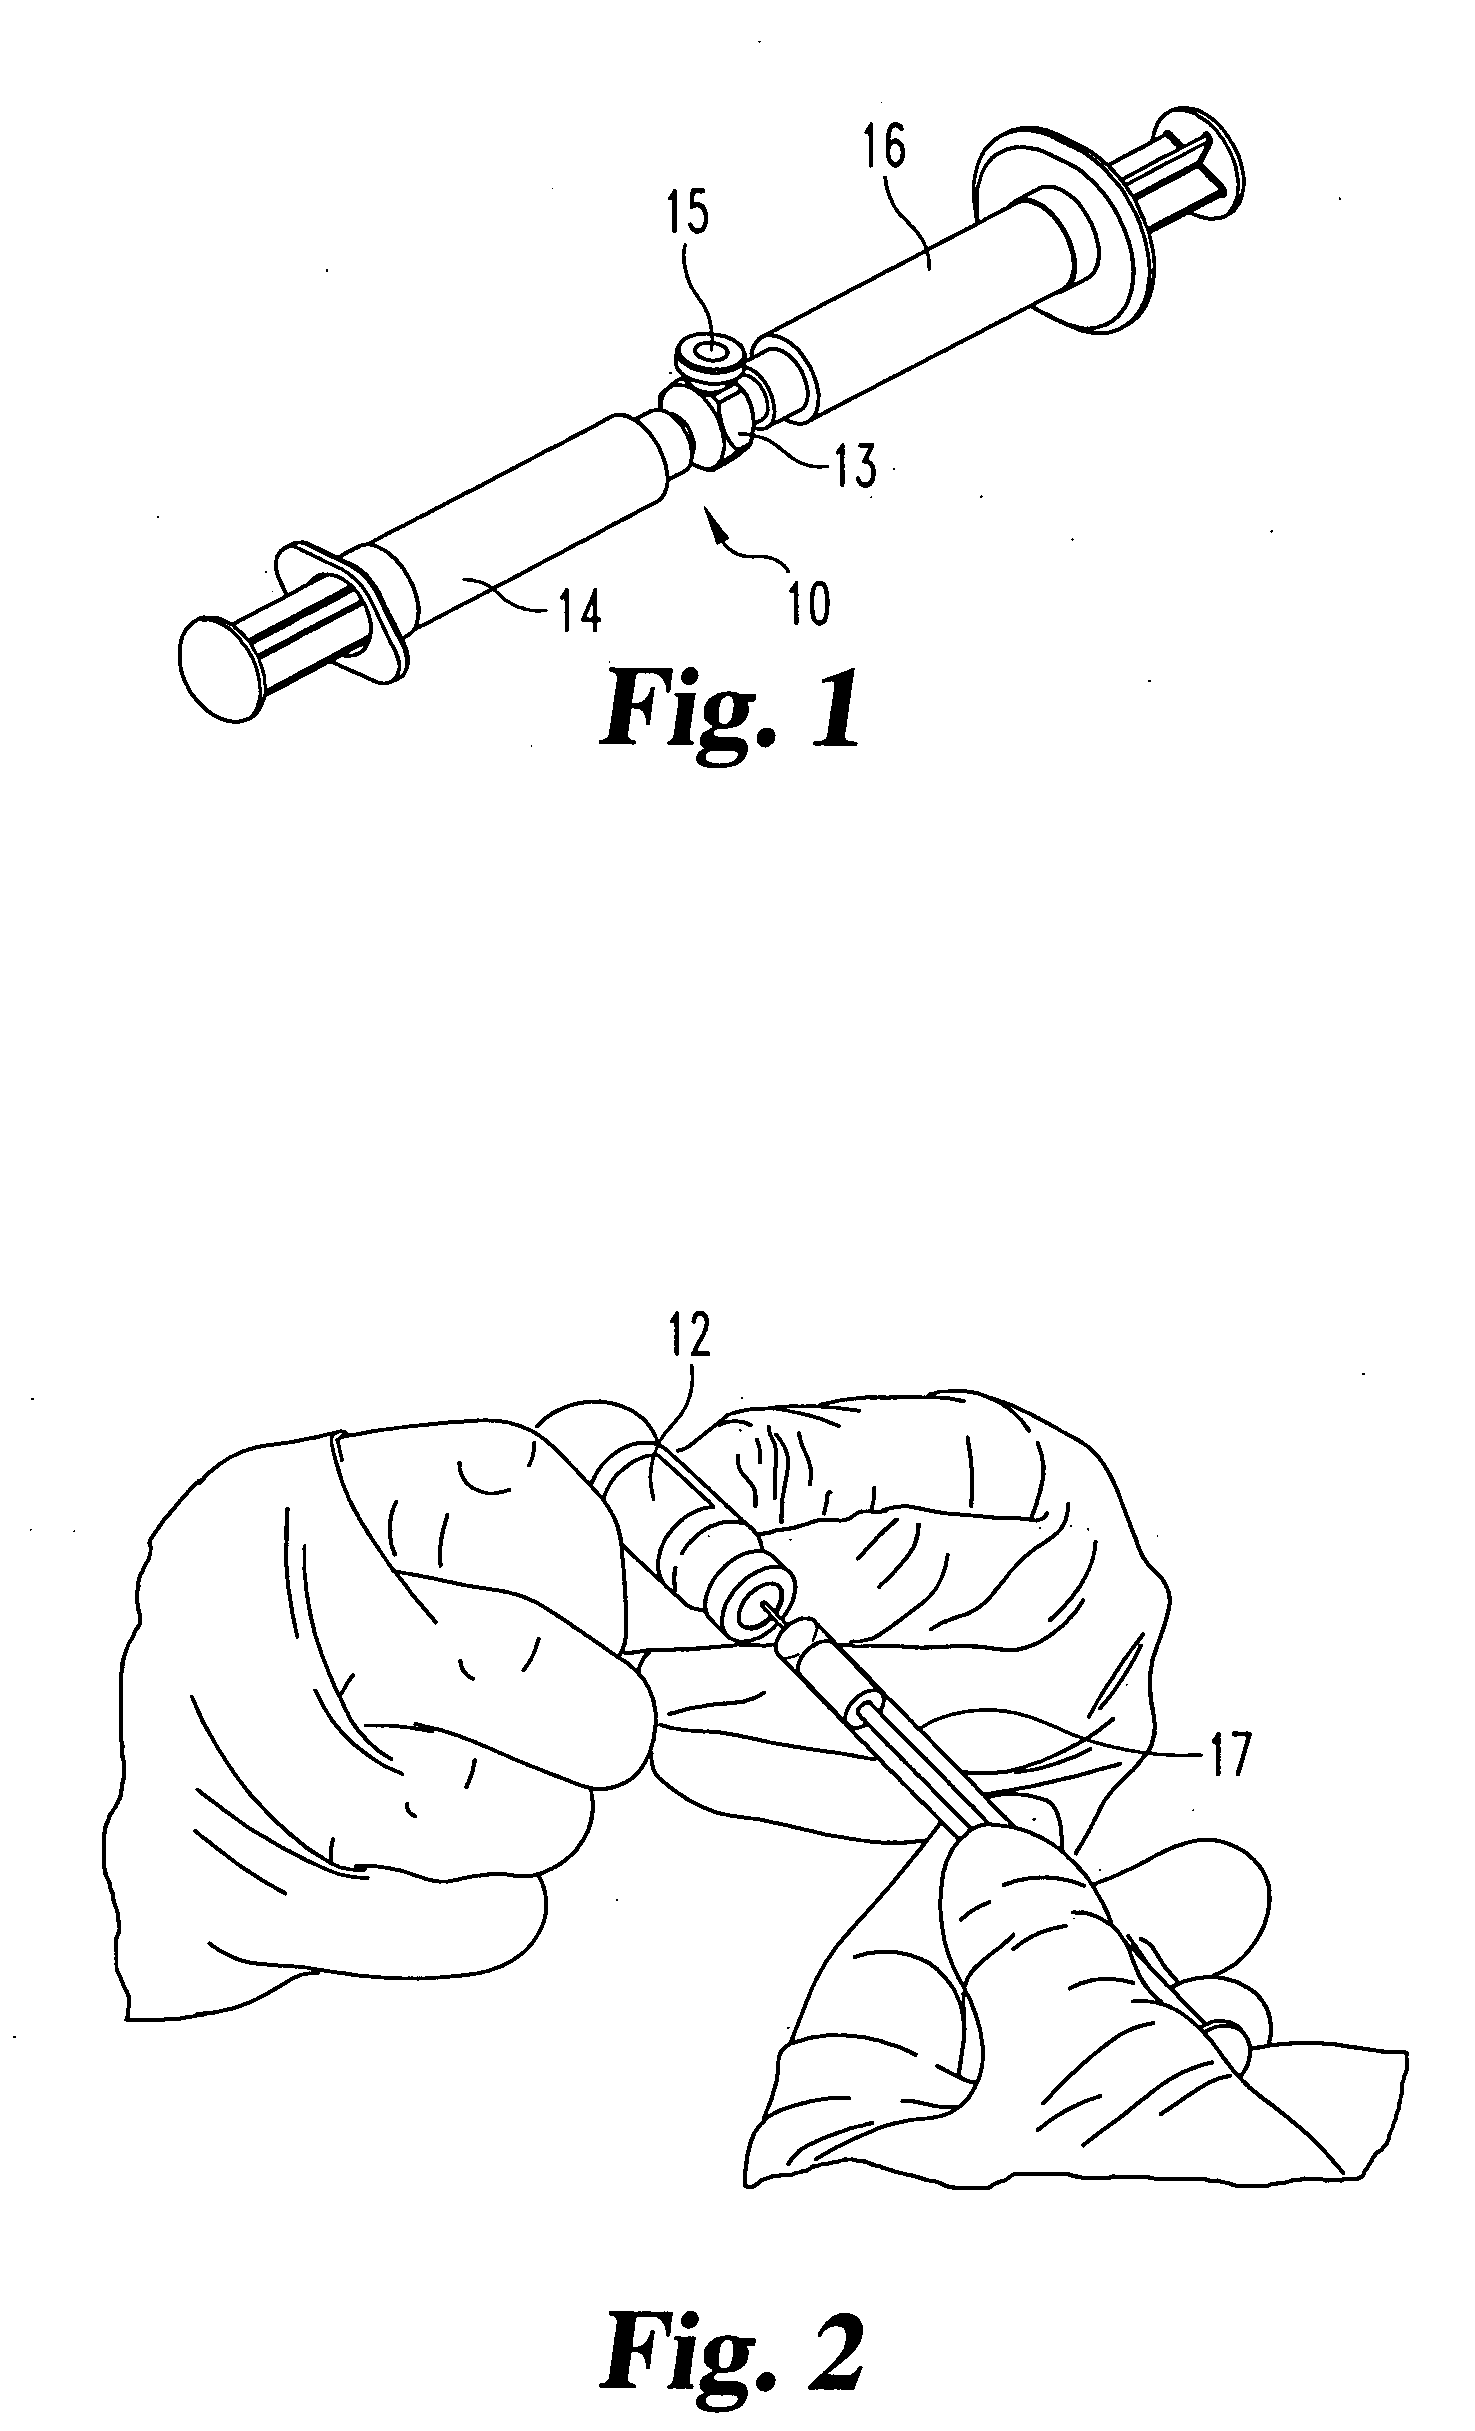 Methods for injecting a curable biomaterial into an intervertebral space